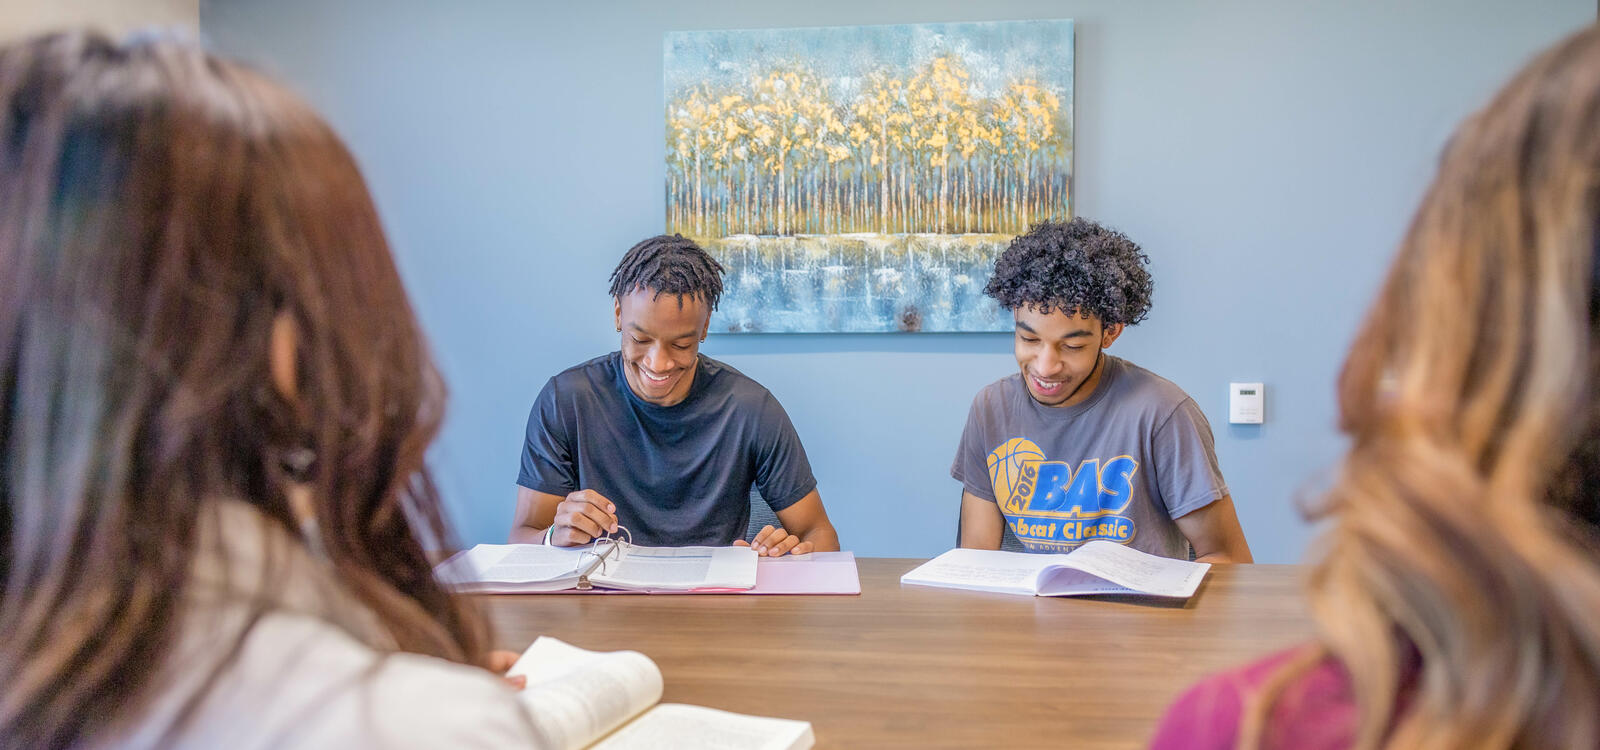 Two male students smiling and reviewing with other students.